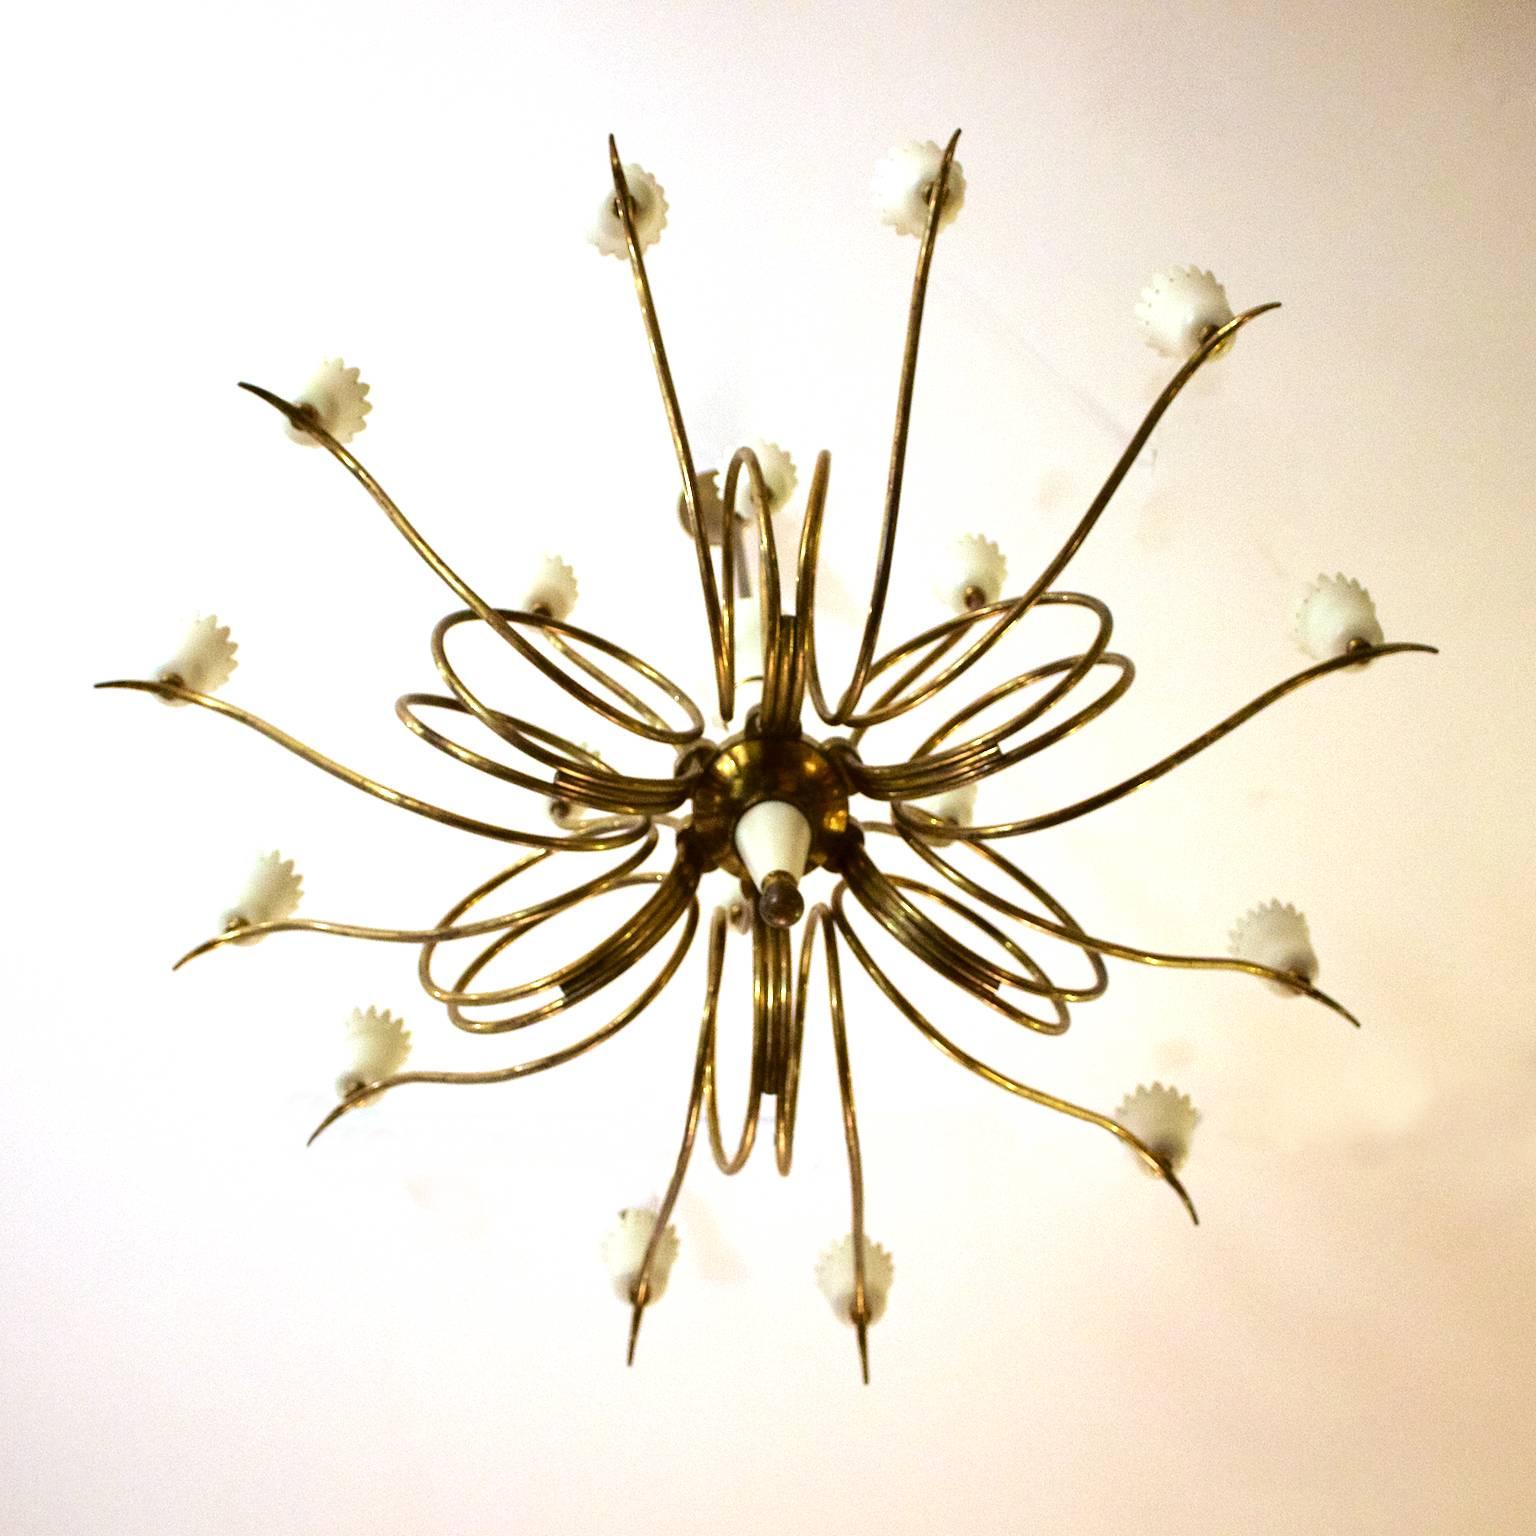 Lacquered Brass Chandelier with Crown-Shaped Details, Mid-20th Century, Italy